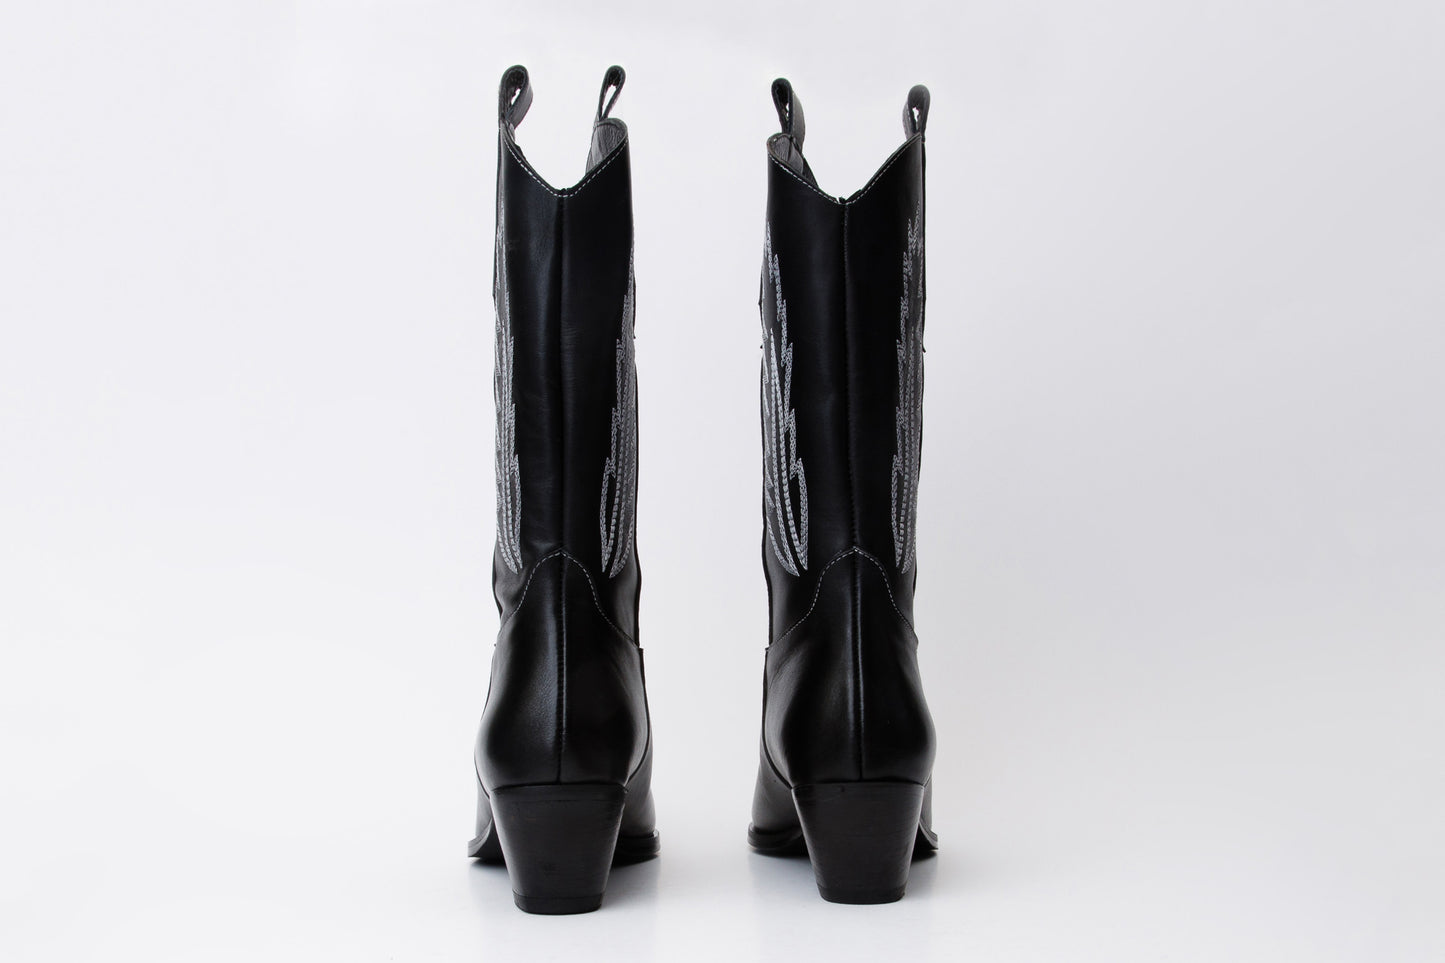 The Togg Black Leather Cowboy Women Boot